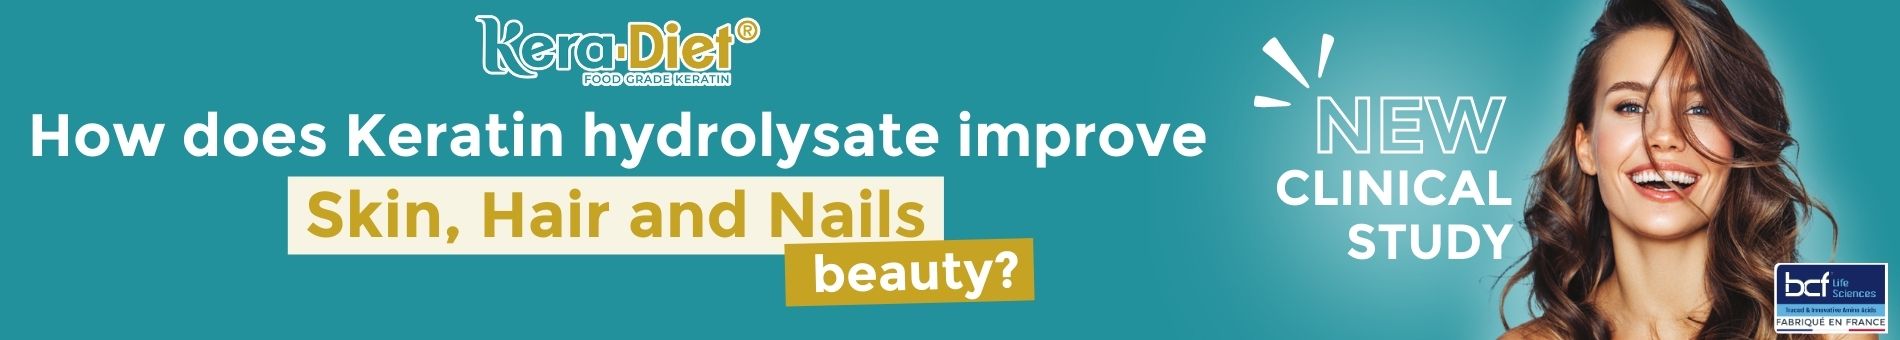 How does Keratin hydrolysate improve Skin, hair, and nails beauty?